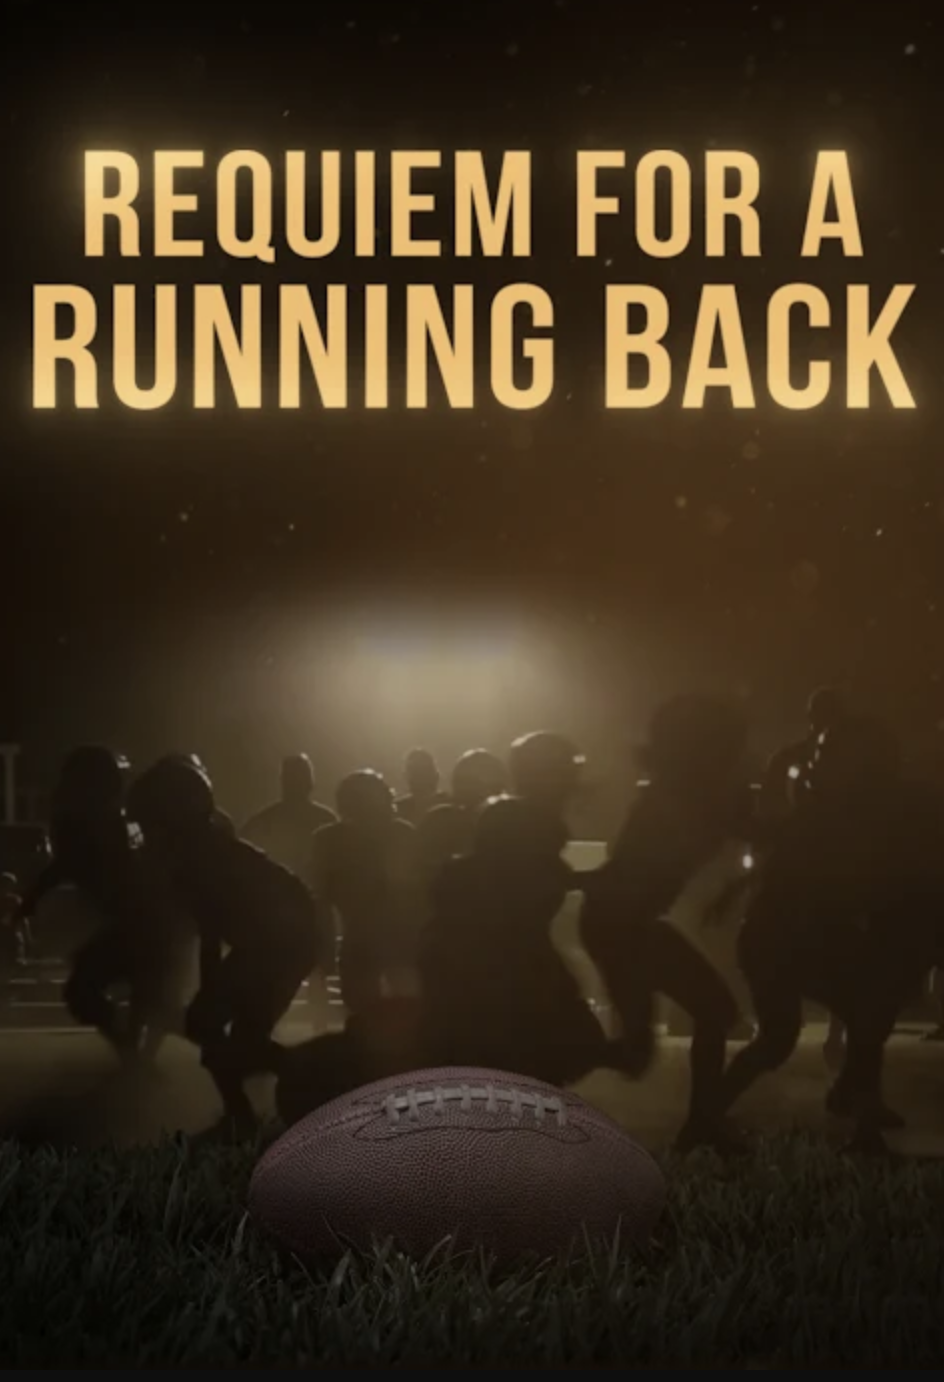 The film's mission "is to try to educate people that you don't need to play contact football as a child to have success in the NFL," Cody Giffords says. (Requiem for a Running Back)